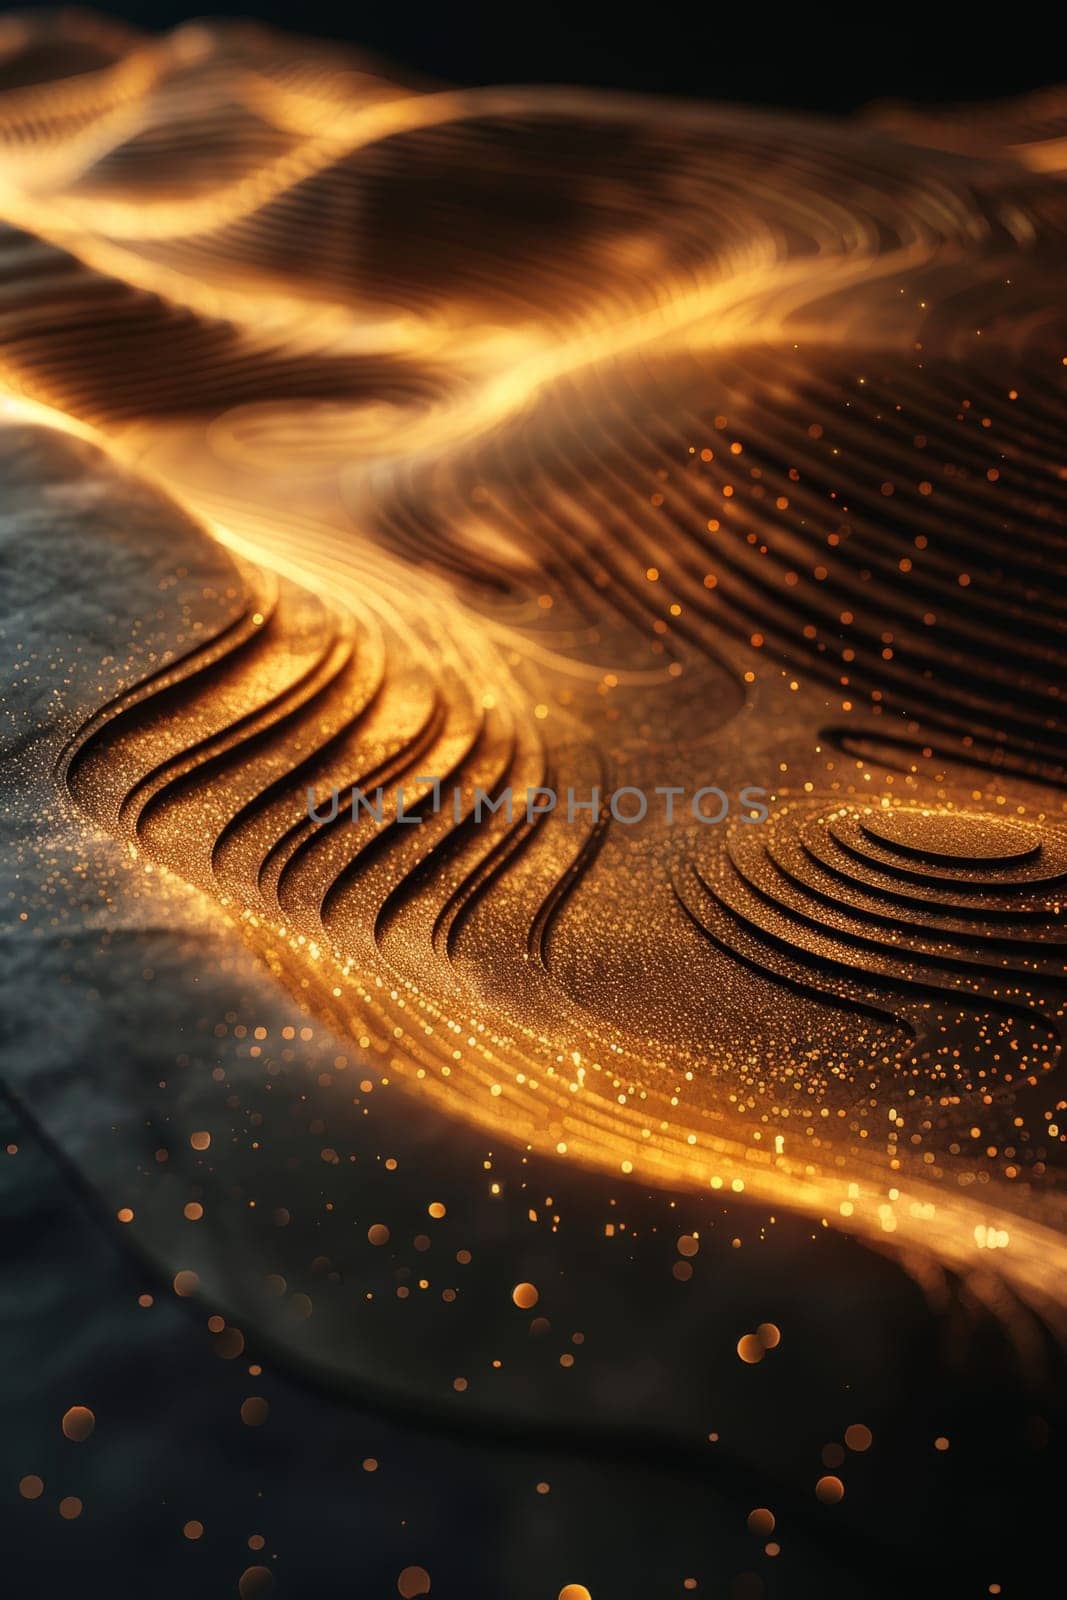 Abstract shiny gold wave design element with glitter effect on a black background by Lobachad